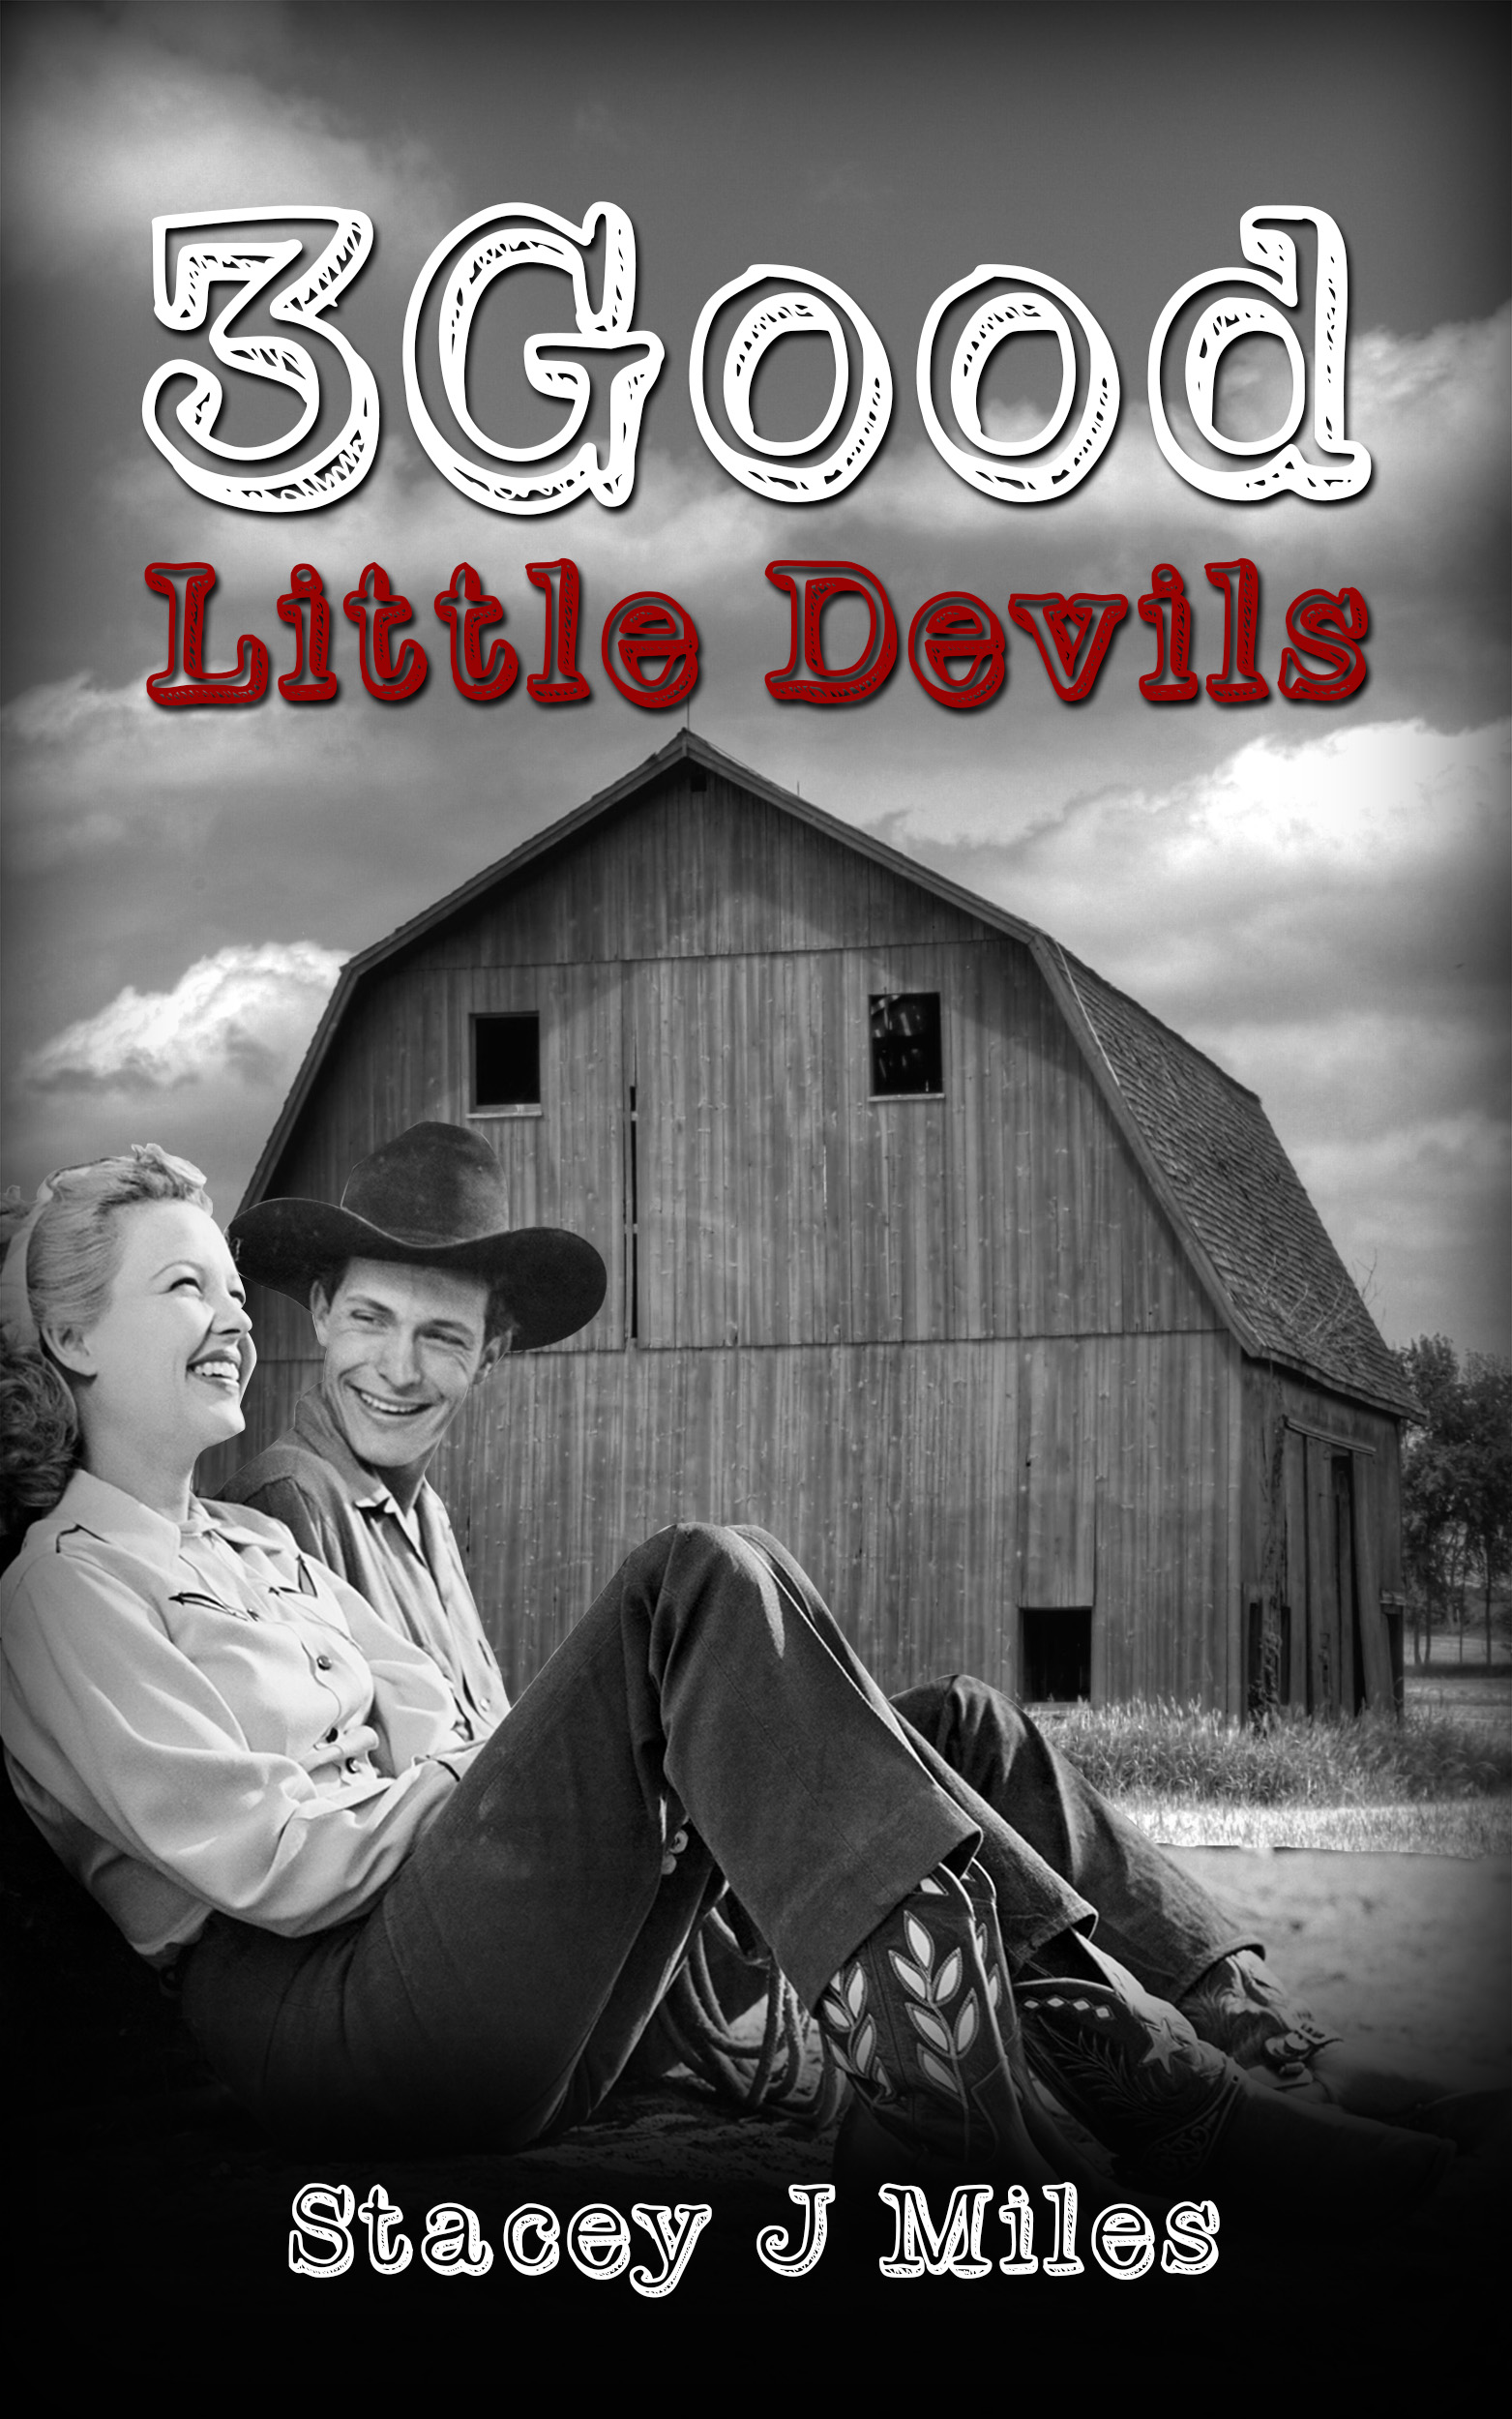 FREE: 3 Good Little Devils by Stacey J Miles